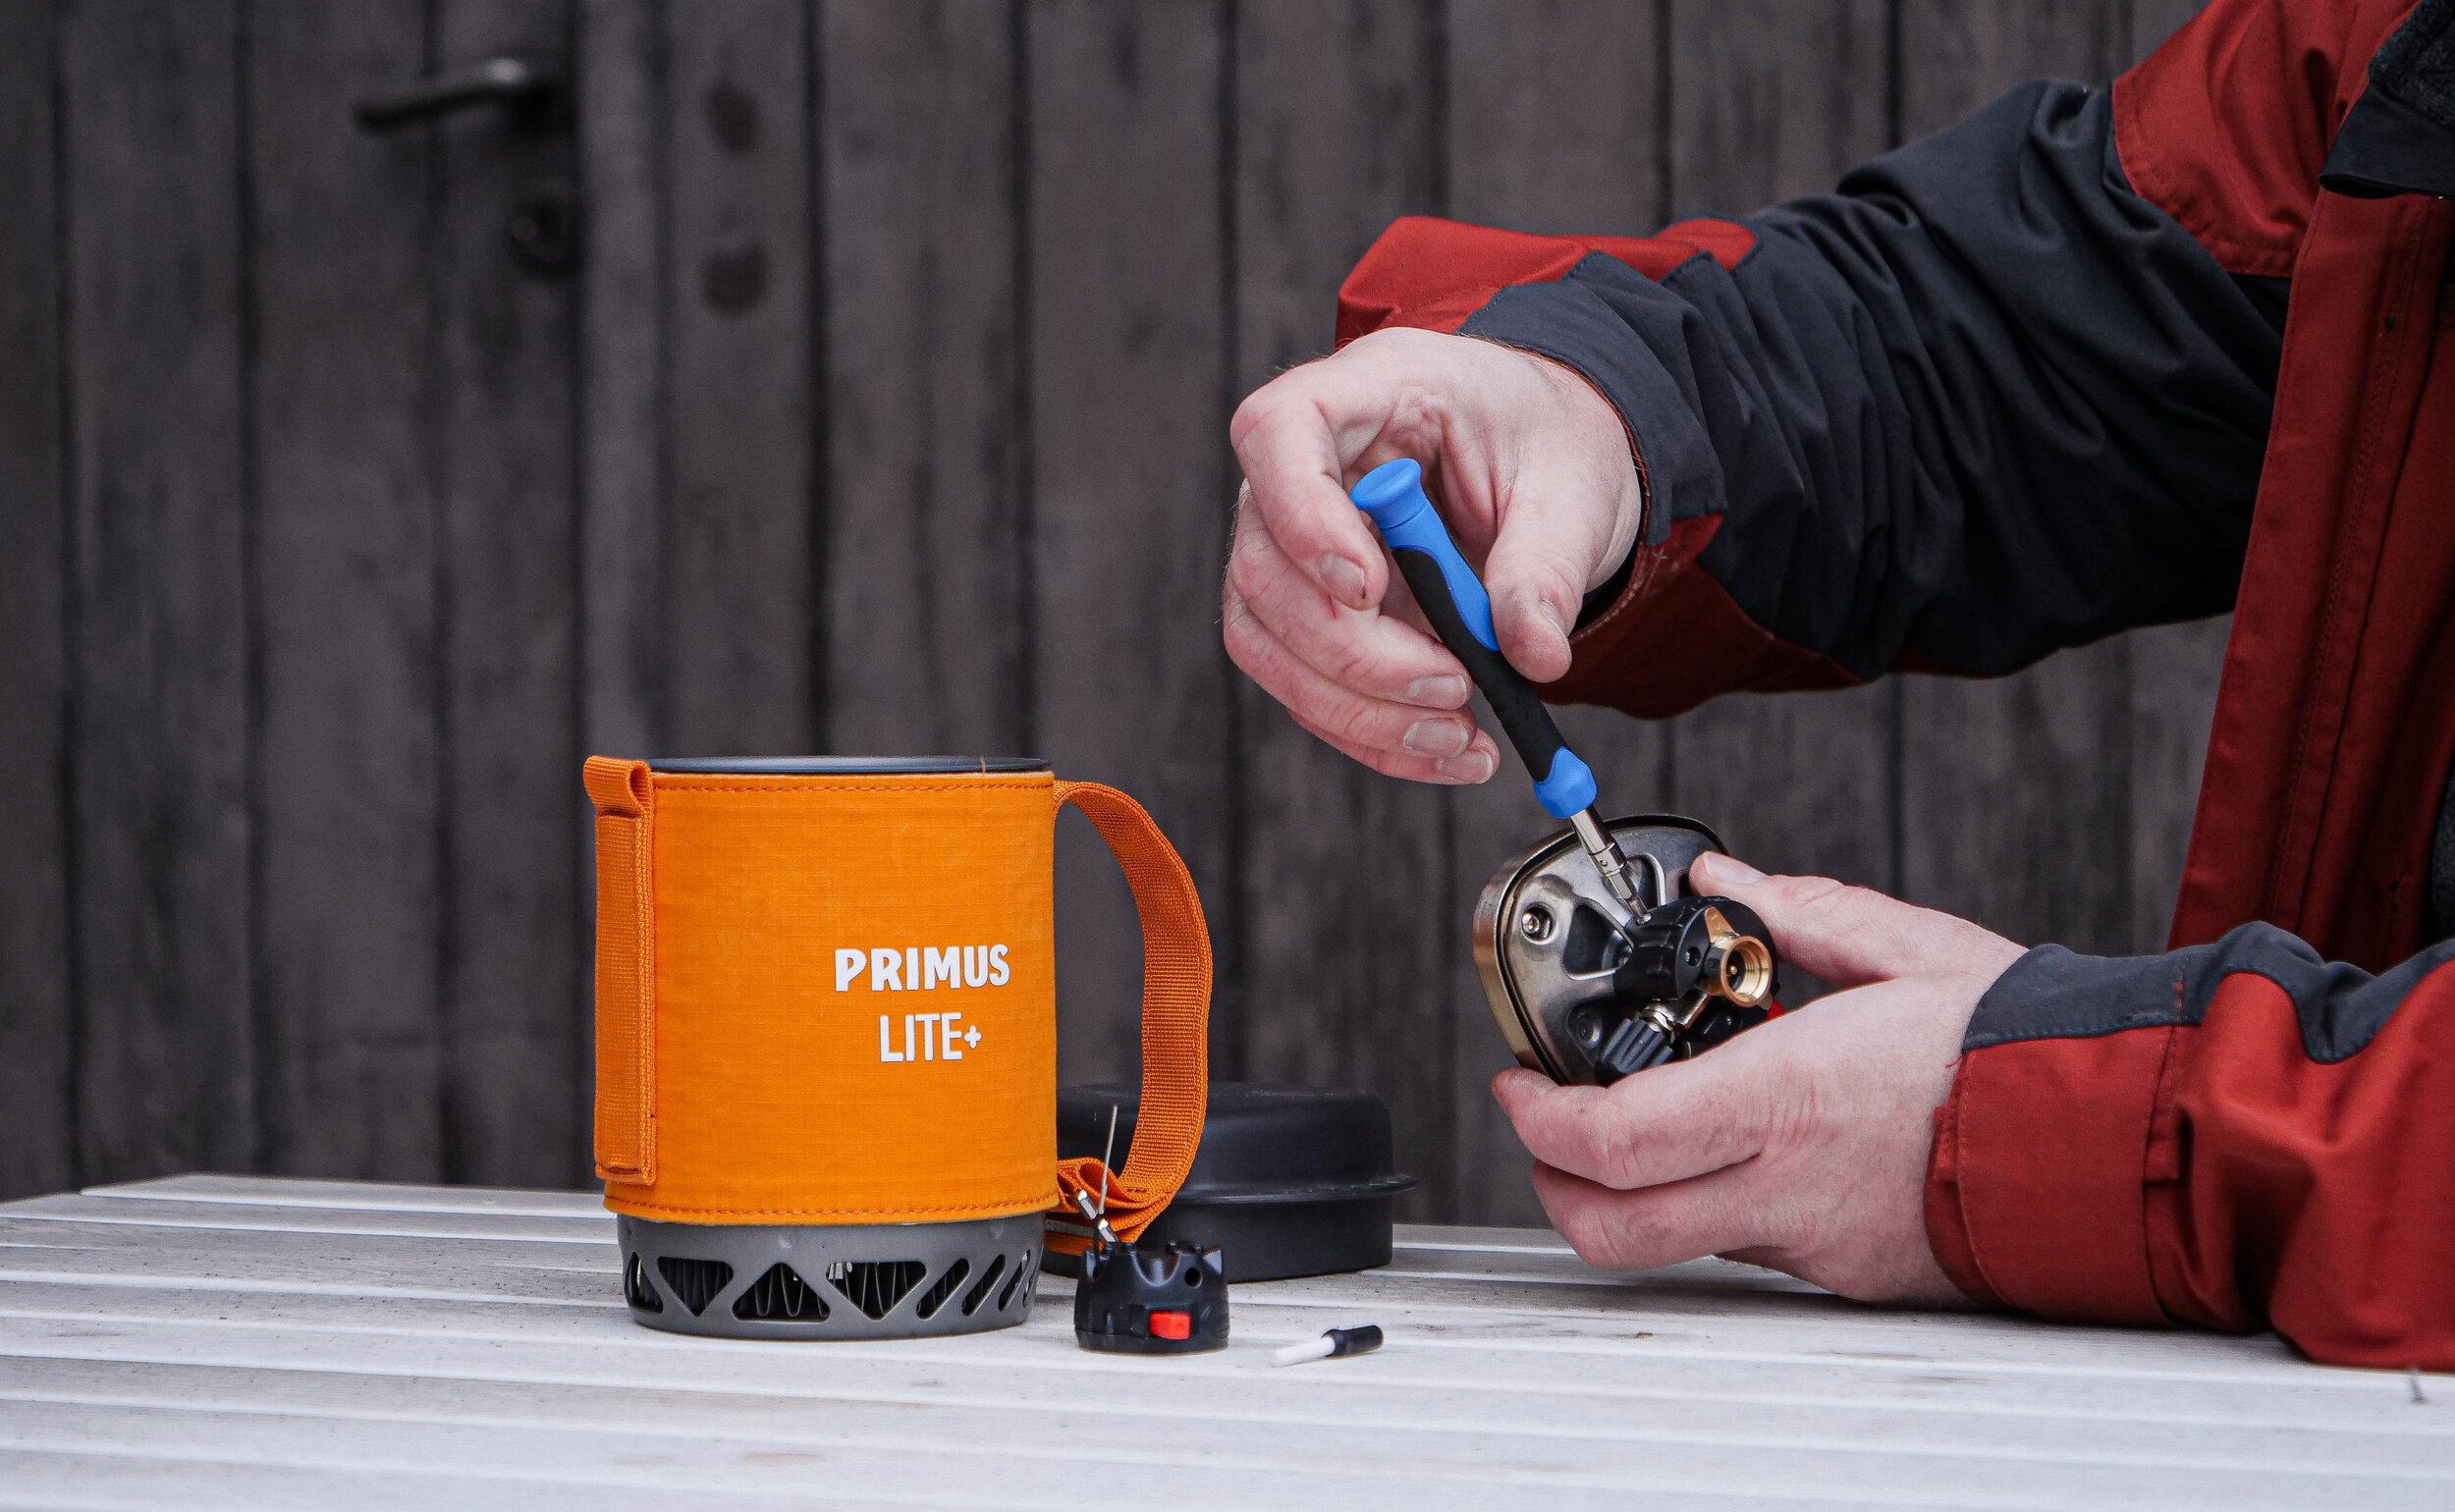 Primus 'Service For a Reason' Initiative Offers Free Replacement Parts to  Reduce Environmental Footprint of Backpacking and Multi-fuel Stoves — rygr